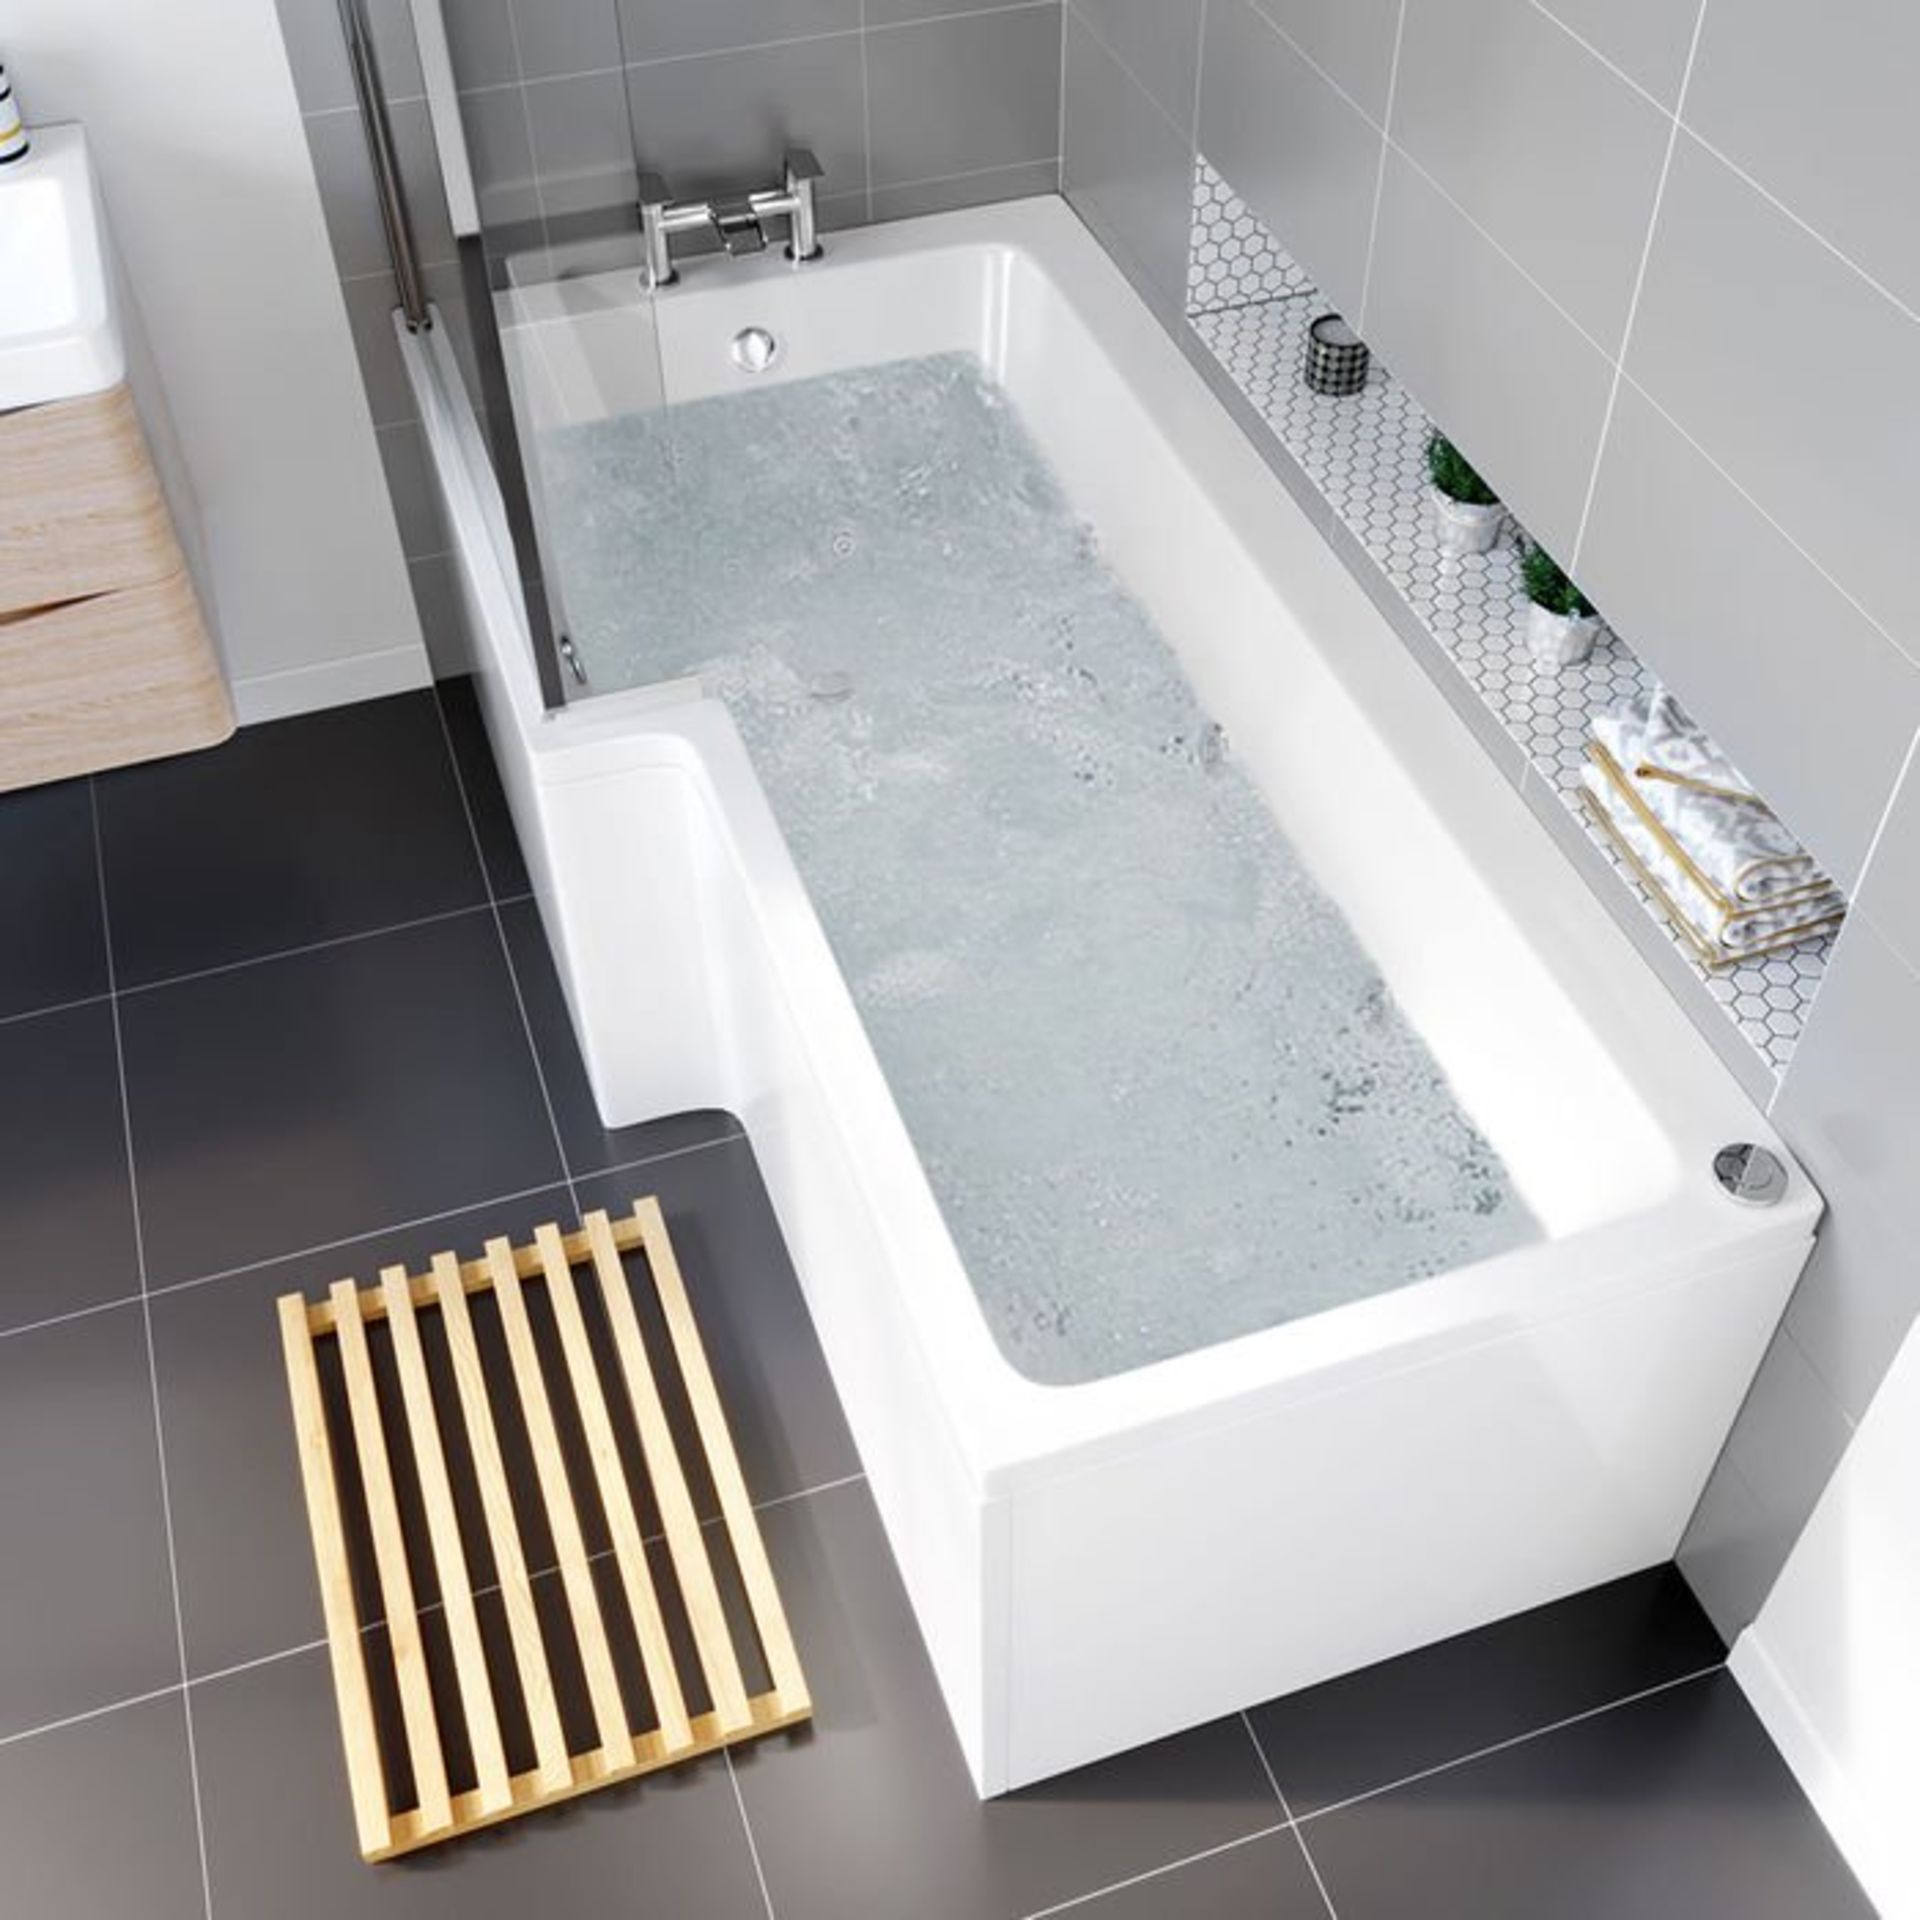 (G70) 1700x700x510mm Whirlpool Left Hand L Shaped Bath - 14 Jets. Indulge in luxury for a truly